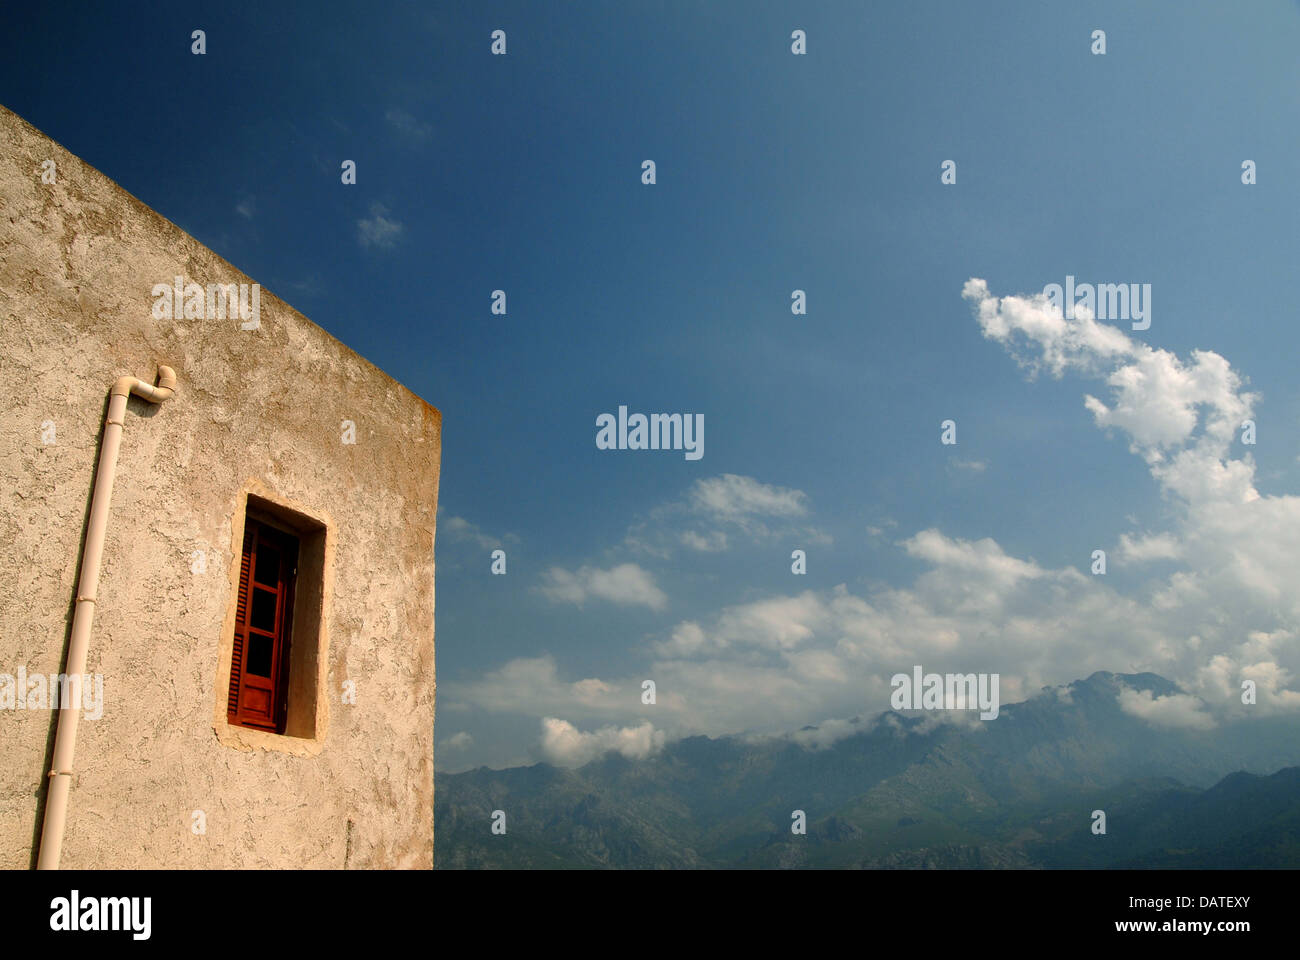 Small building in a hill-side village in Corsica, France. Mountains and blue sky on horizon. Stock Photo